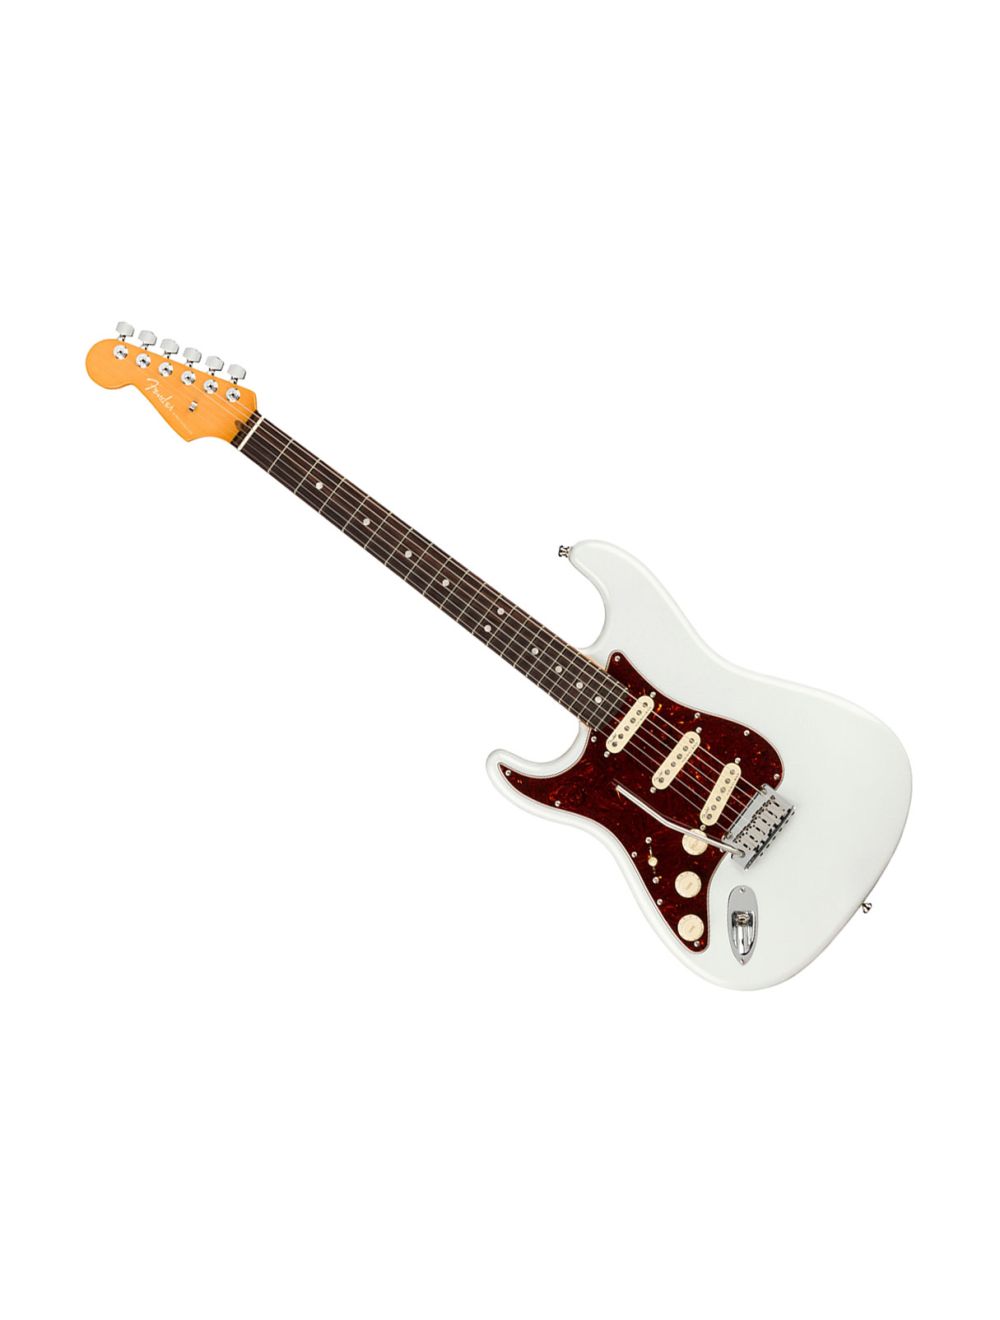 Fender American Ultra Stratocaster Left-Hand guitar- Arctic Pearl w/ Rosewood FB $1529